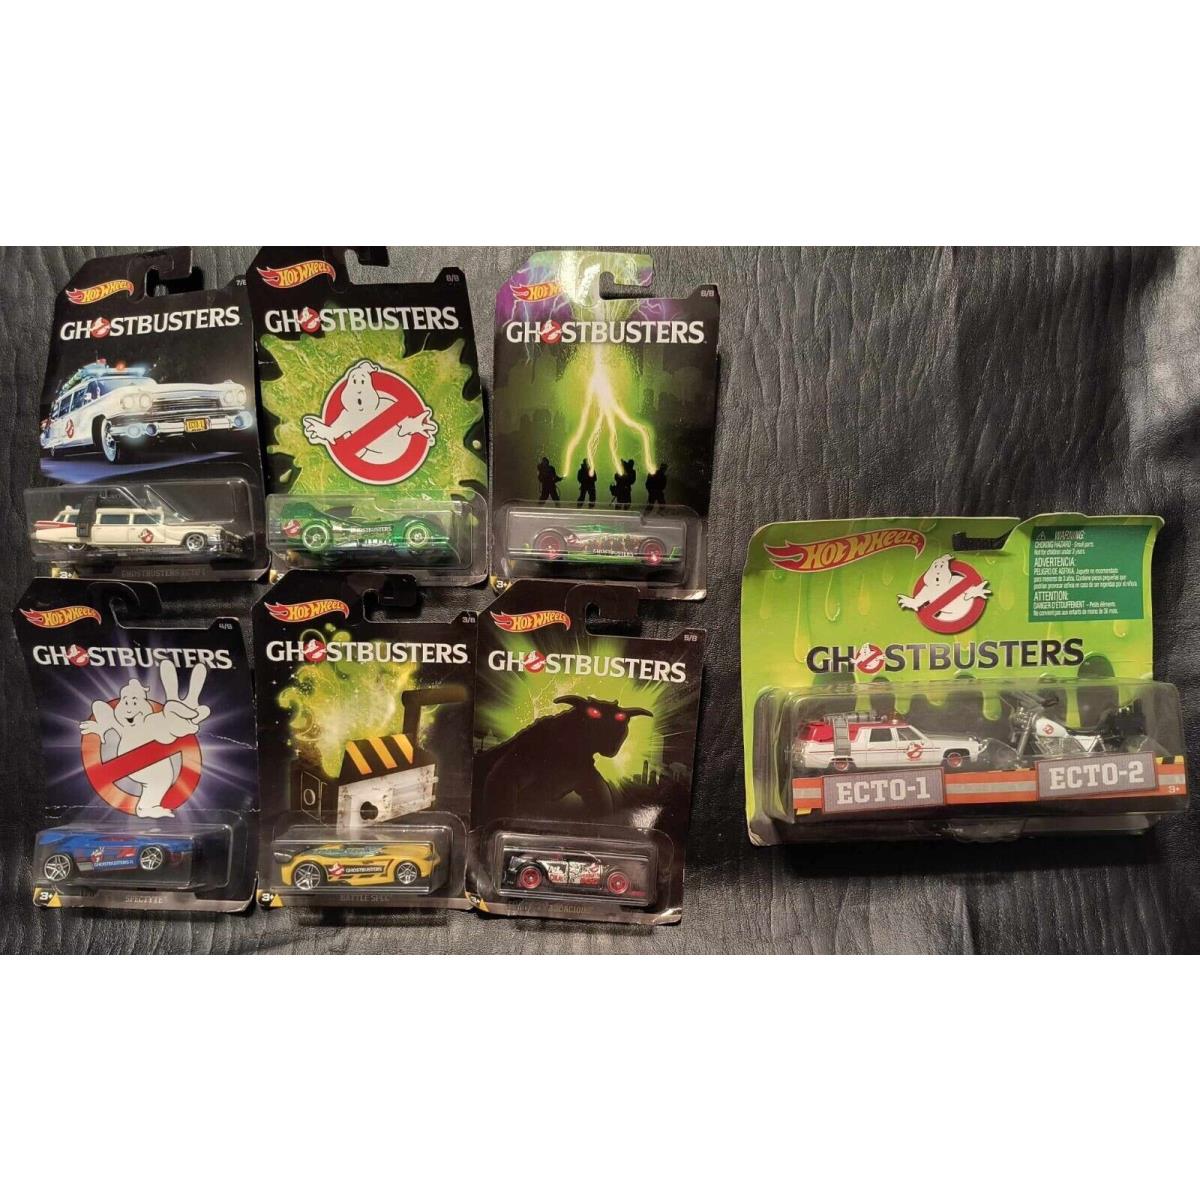 Hot Wheels Ghostbusters 2 Pack + 6 Other Ghostbusters Hot Wheels Cars